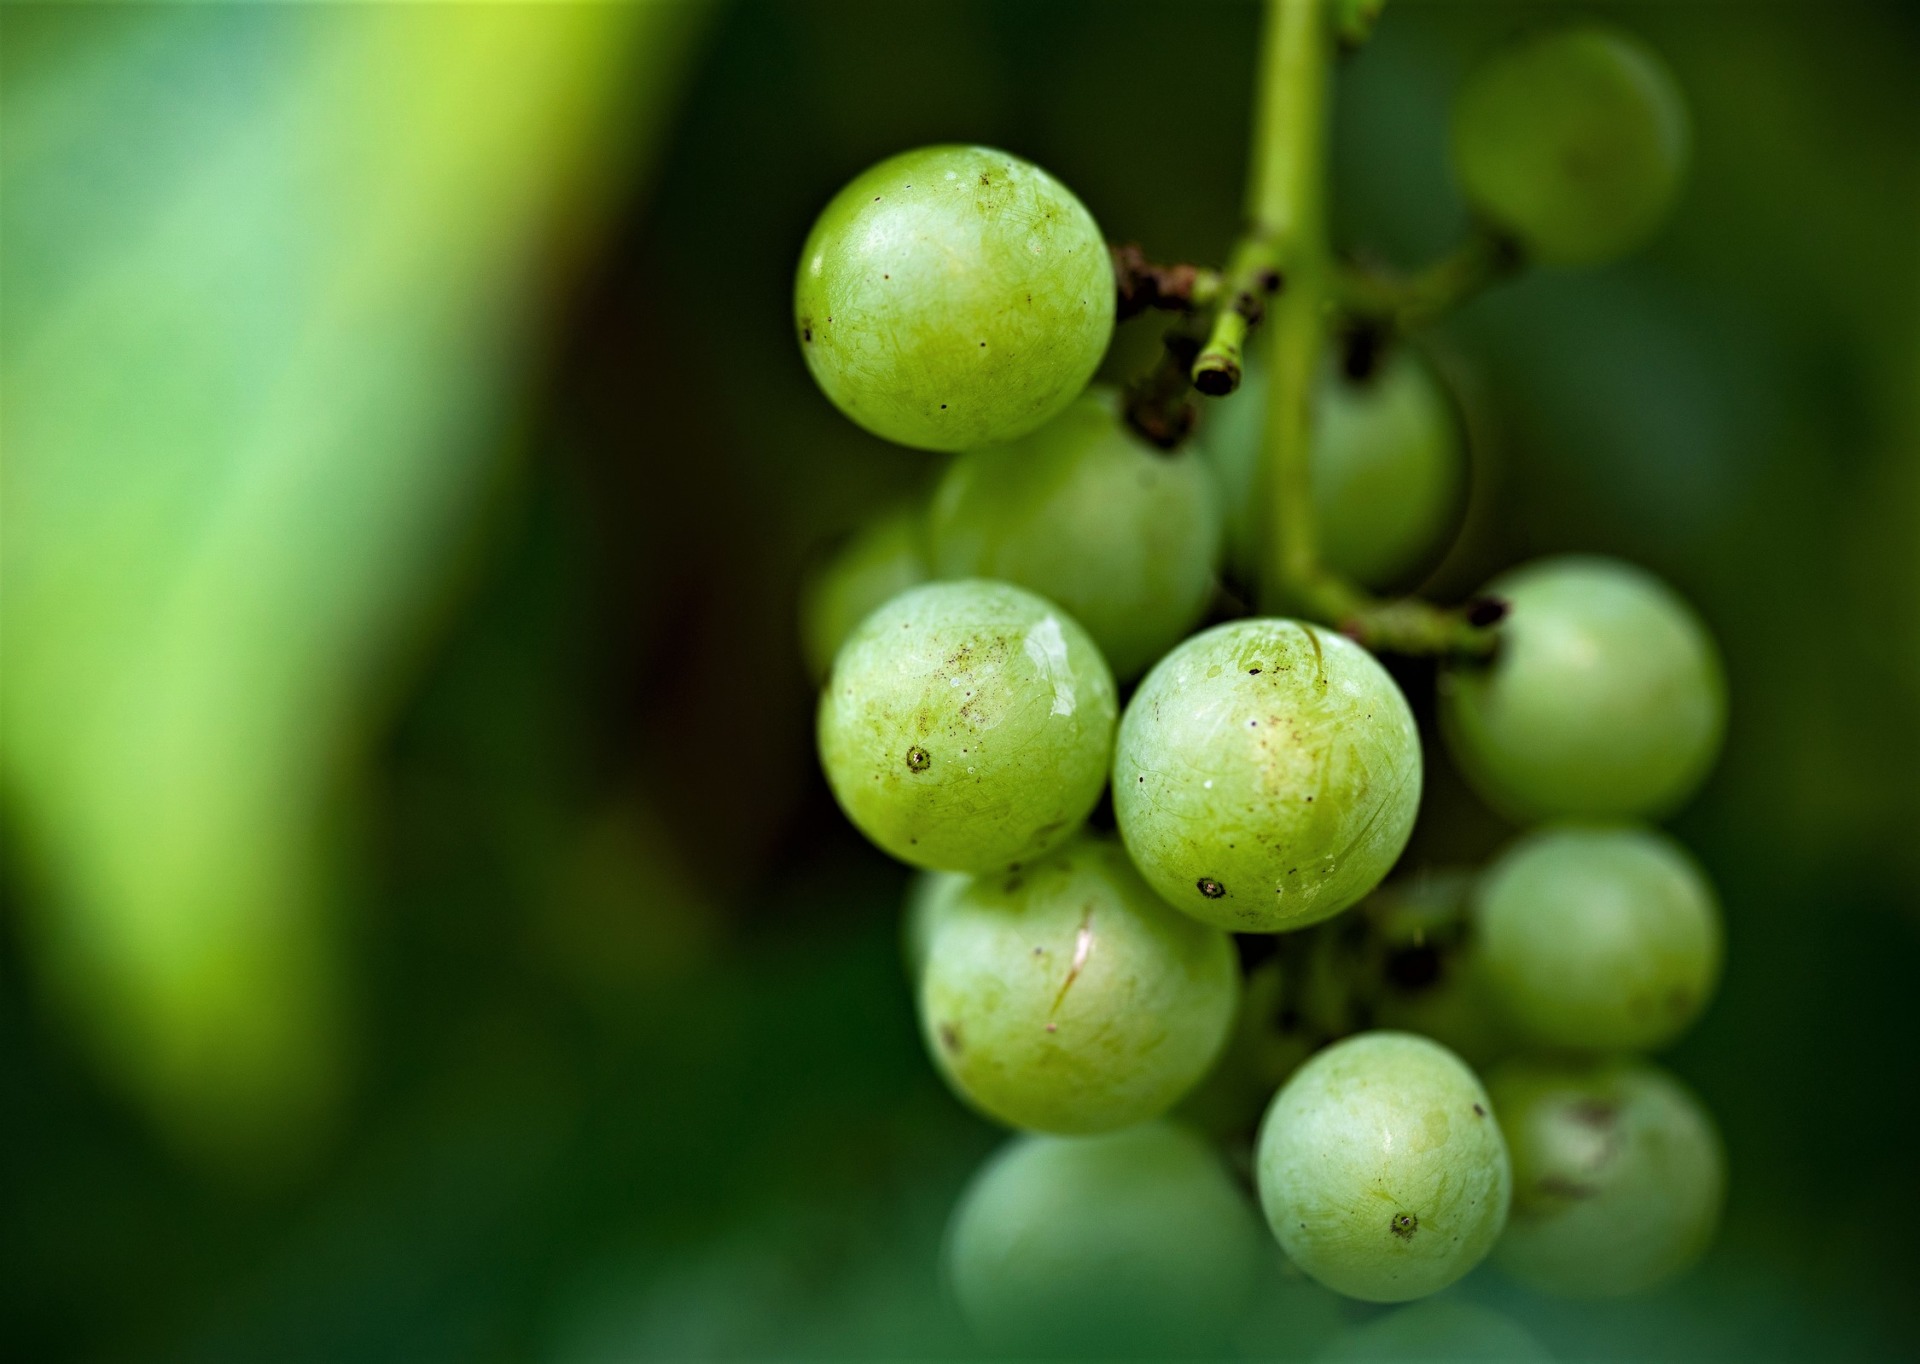 Texas vineyards report low yields, high quality grapes